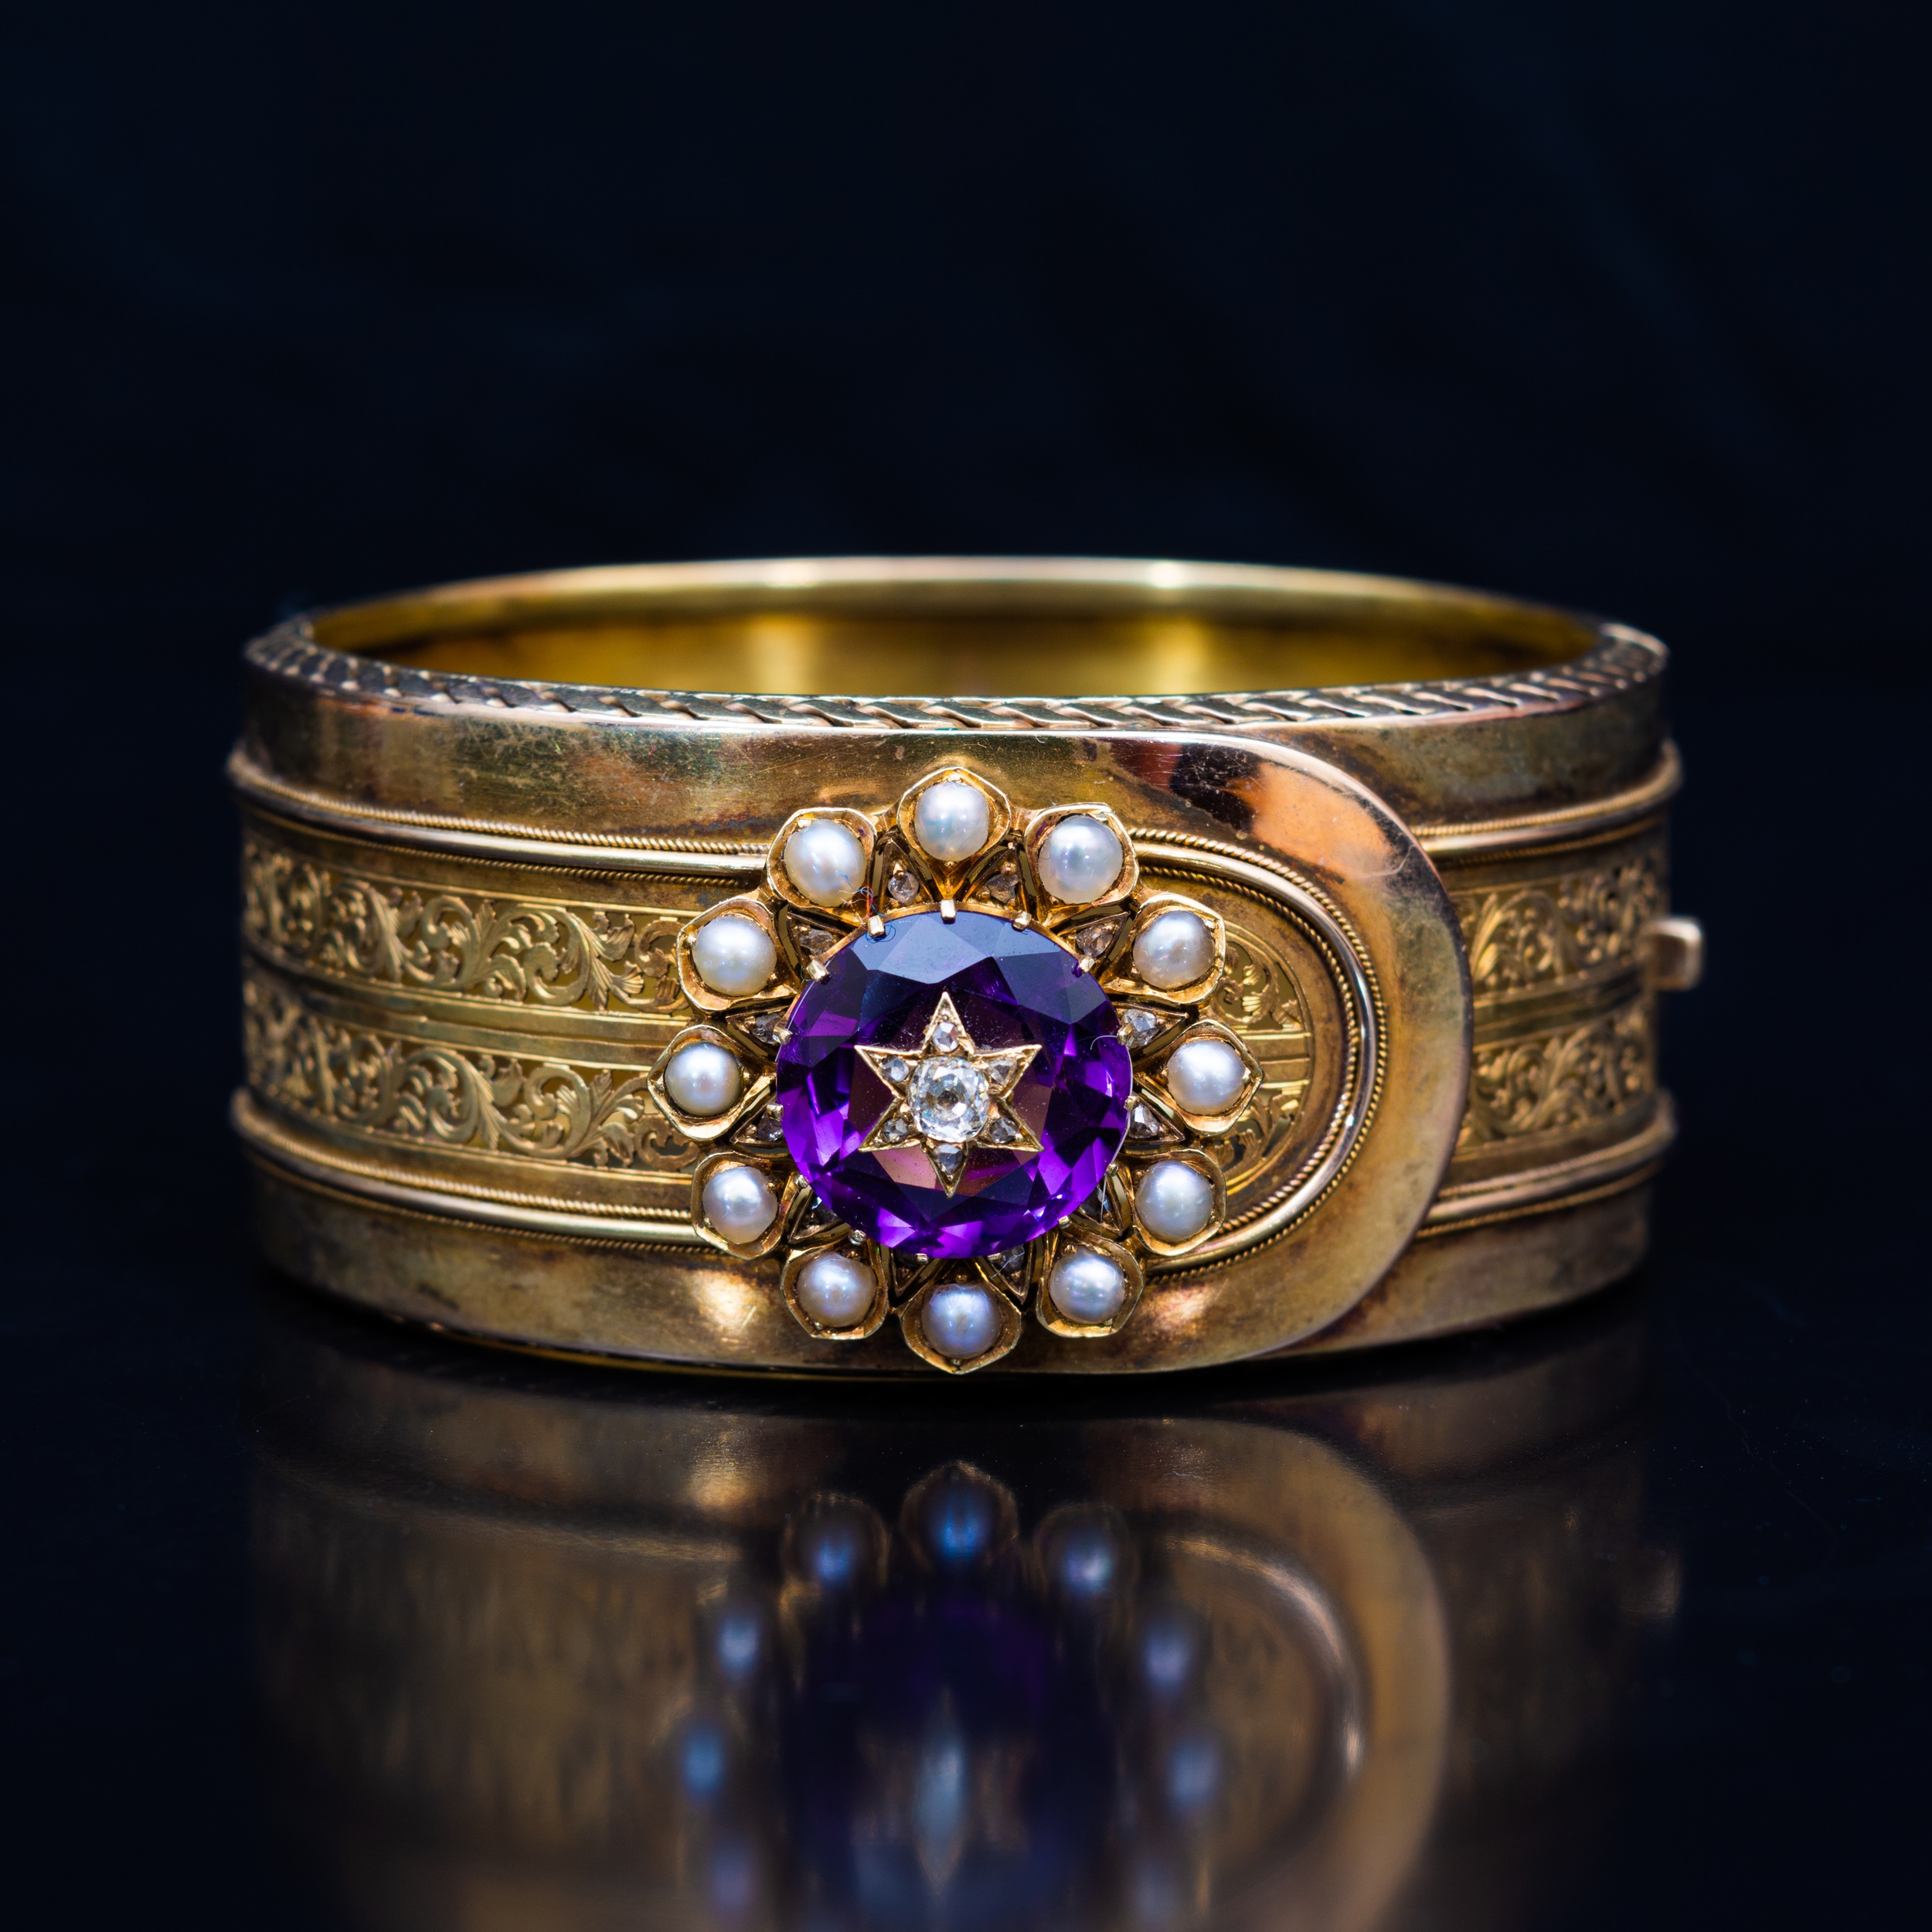 A late 19th Century yellow metal bangle with an amethyst, diamond and pearl cluster.